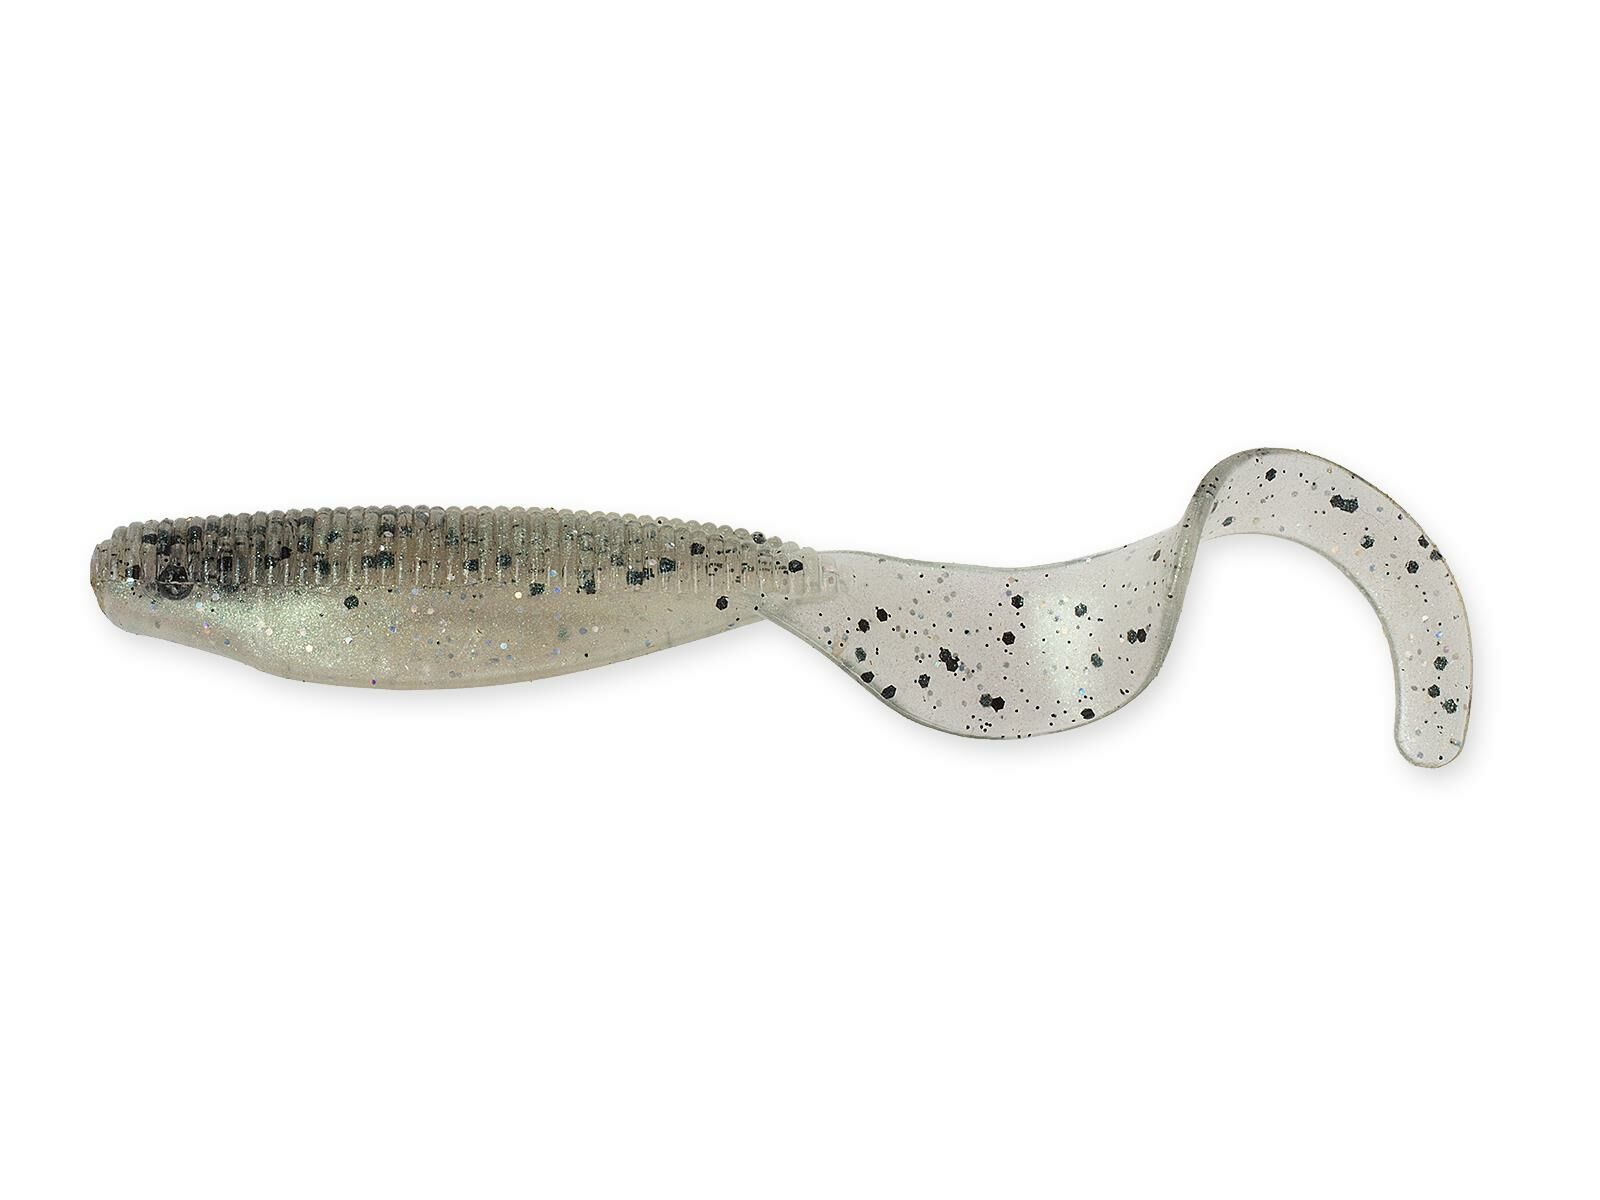 4" Scented Curly Tailz - Bad Shad